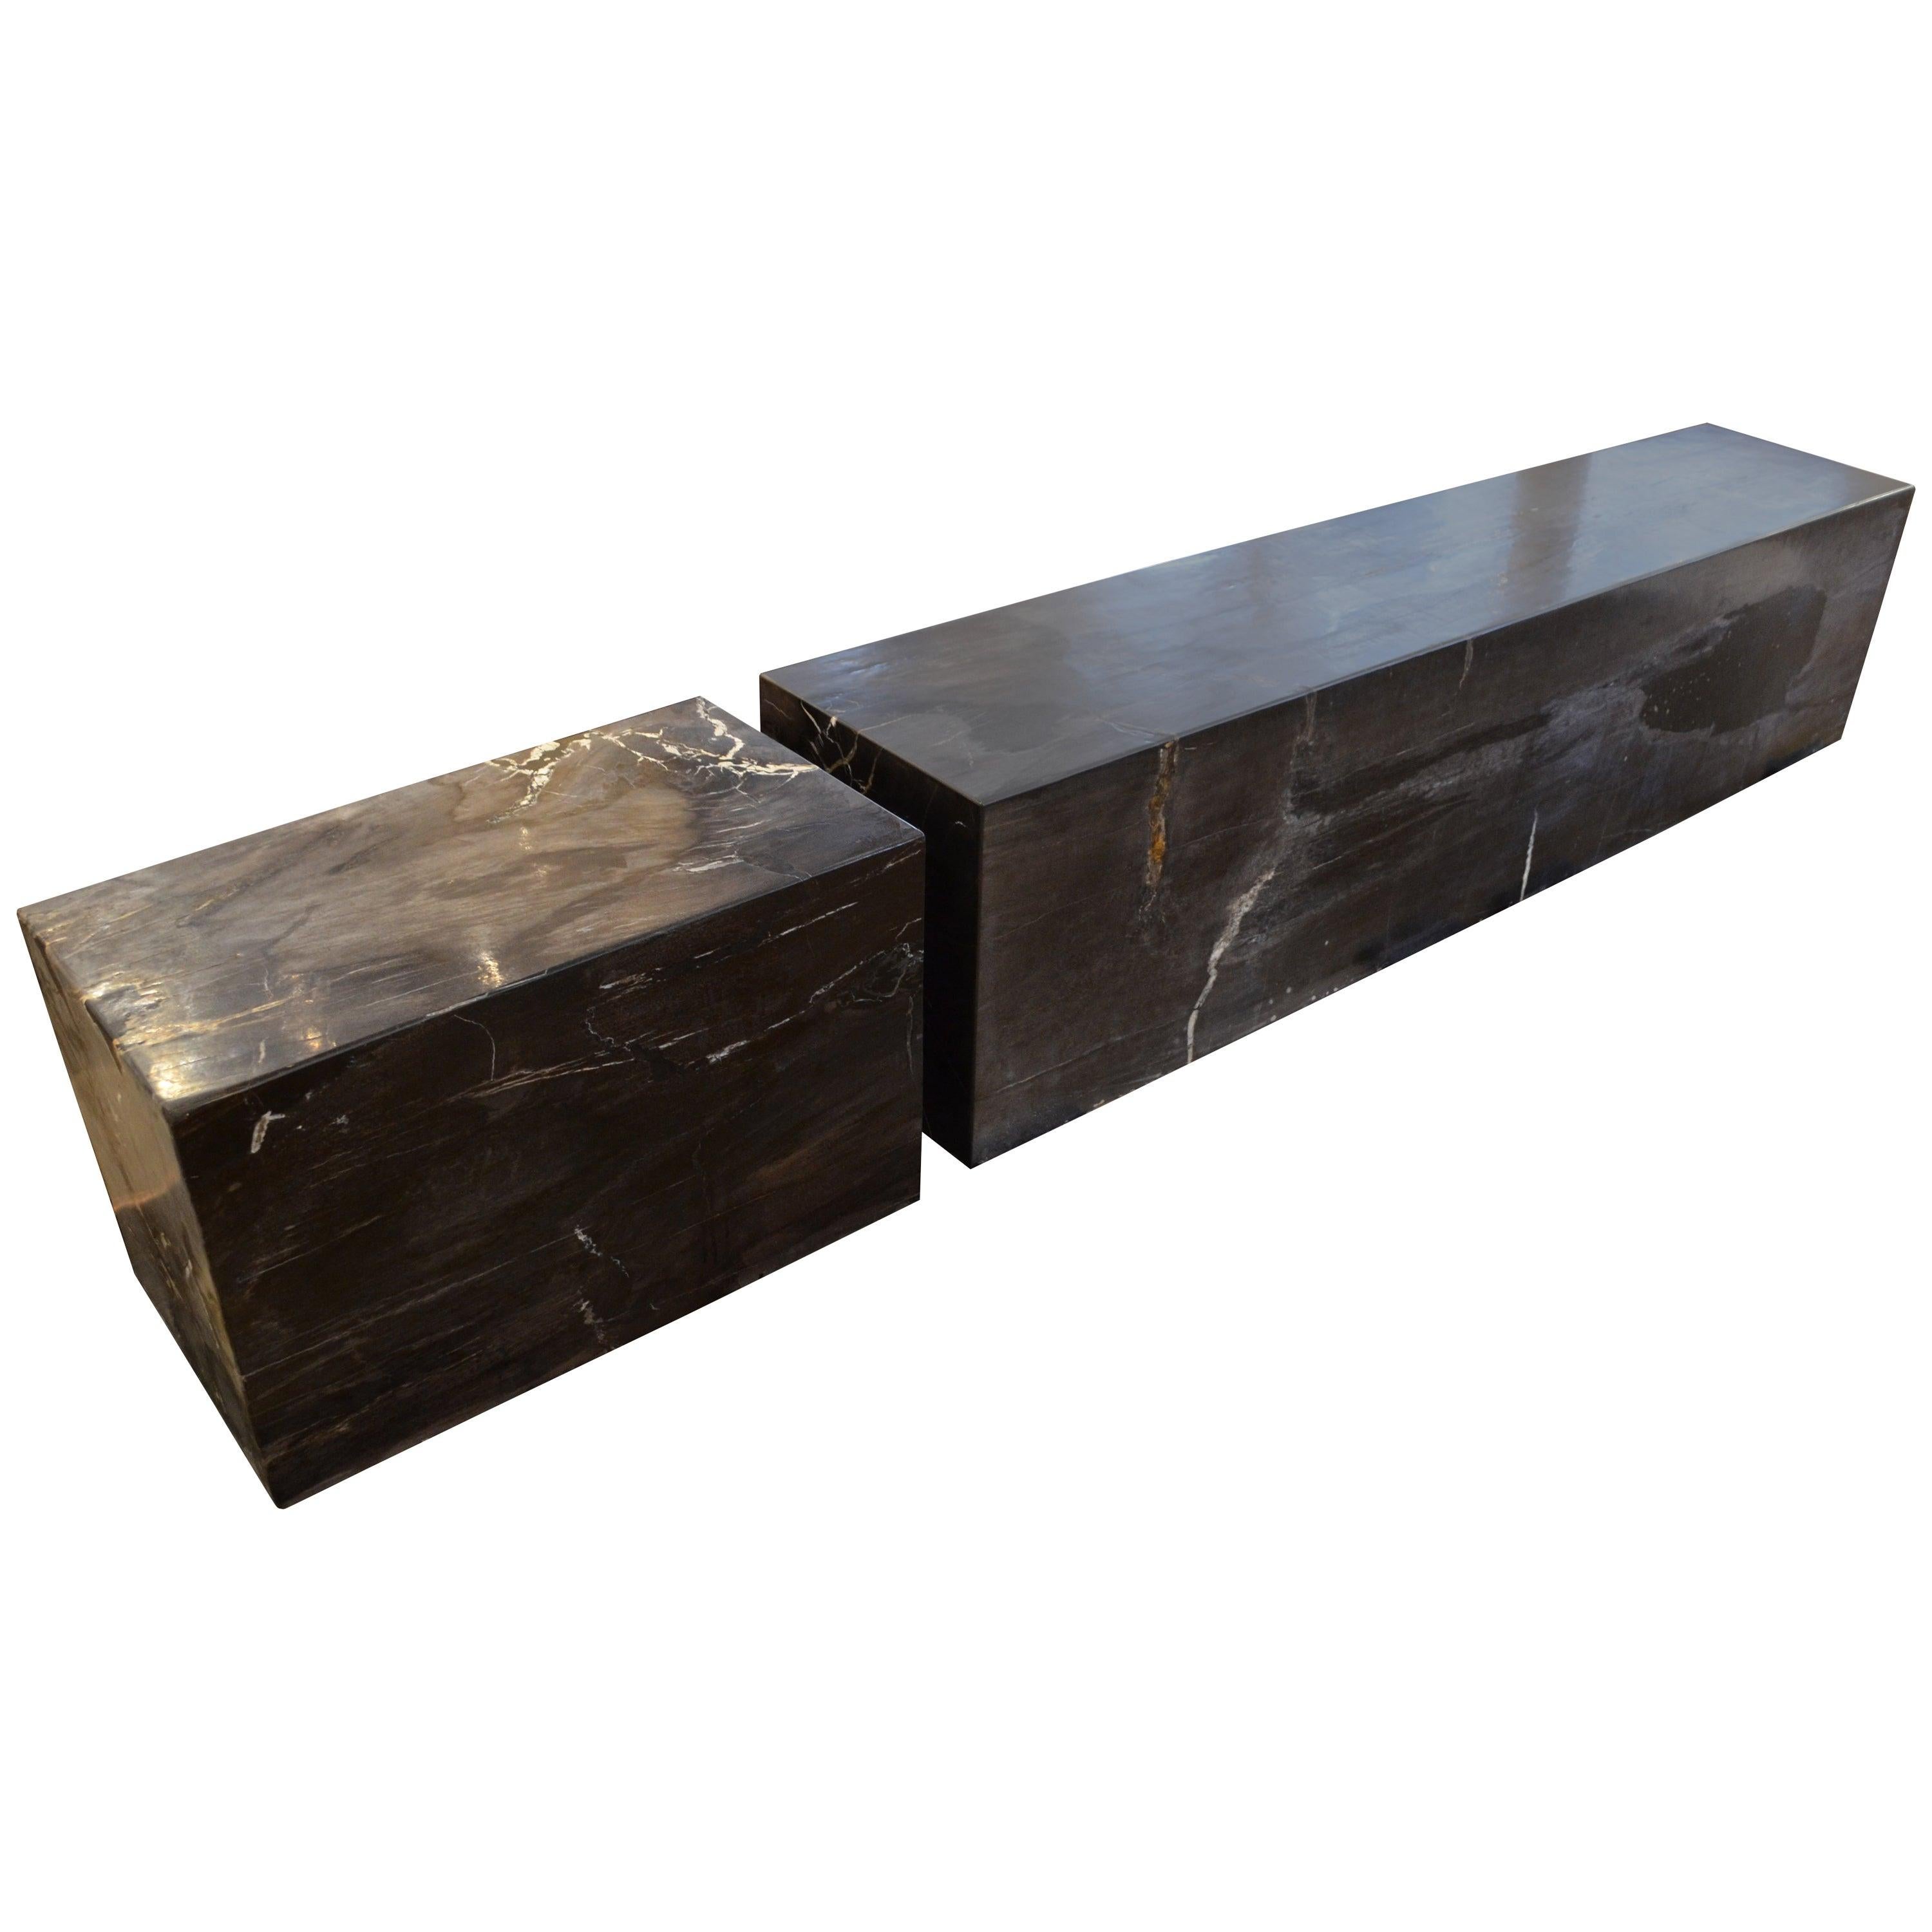 High quality petrified wood log bench. Stunning charcoal grey, black and white tones paired with the scale make this an impressive piece for any space. The price reflects both pieces. Please inquire if you would like to purchase one. Measures: 66 x